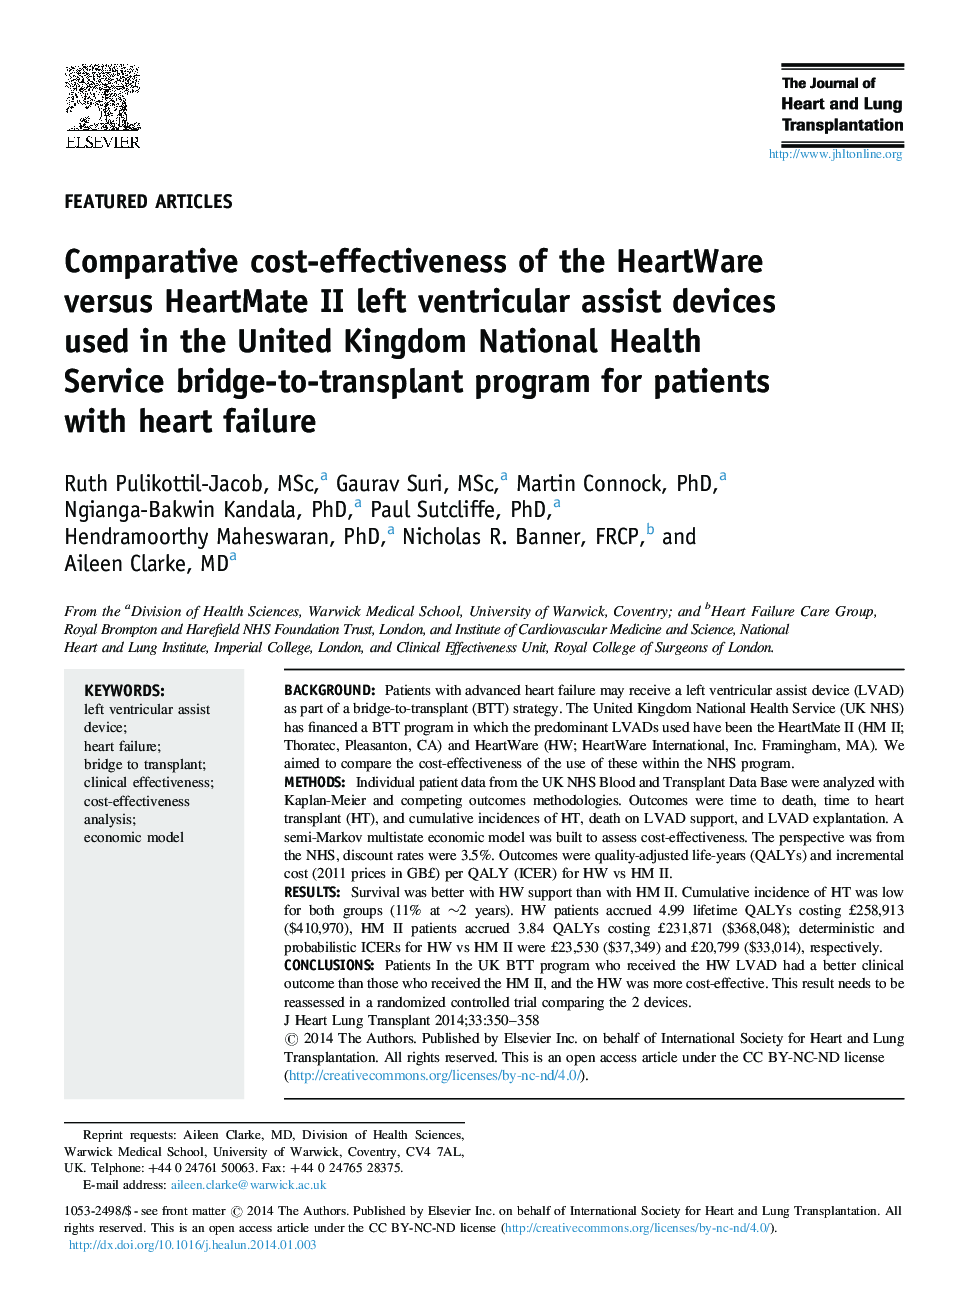 Comparative cost-effectiveness of the HeartWare versus HeartMate II left ventricular assist devices used in the United Kingdom National Health Service bridge-to-transplant program for patients with heart failure